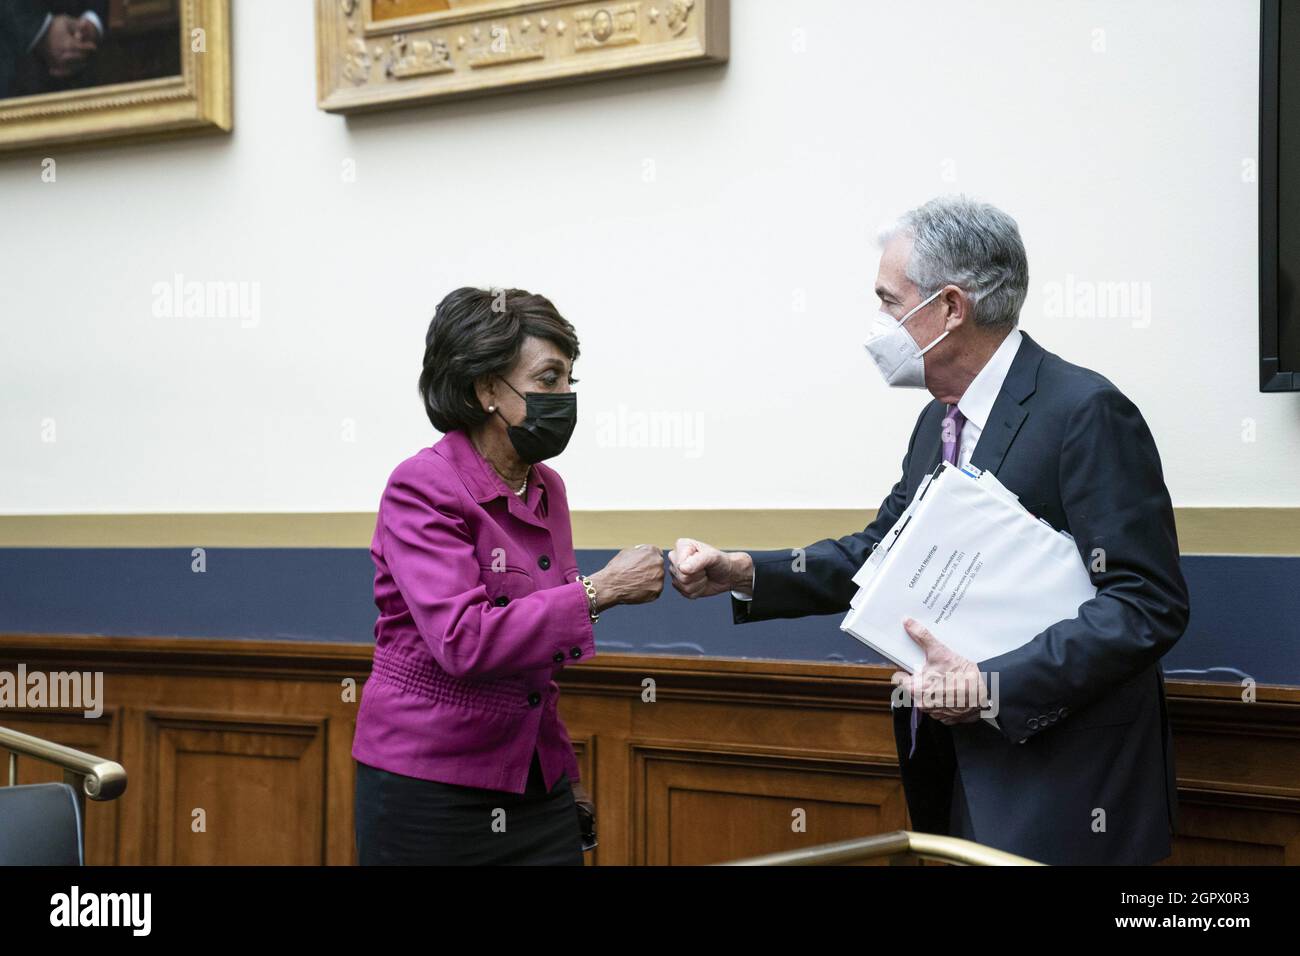 Washington, United States. 30th Sep, 2021. Representative Maxine Waters (D-CA), chairwoman of the House Financial Services Committee, greets Federal Reserve Chairman Jerome Powell following a House Financial Services Committee hearing on oversight of the Treasury Department and Federal Reserve coronavirus pandemic response on Capitol Hill in Washington, DC on Thursday September 30, 2021. Photo by Sarah Silbiger/UPI Credit: UPI/Alamy Live News Stock Photo